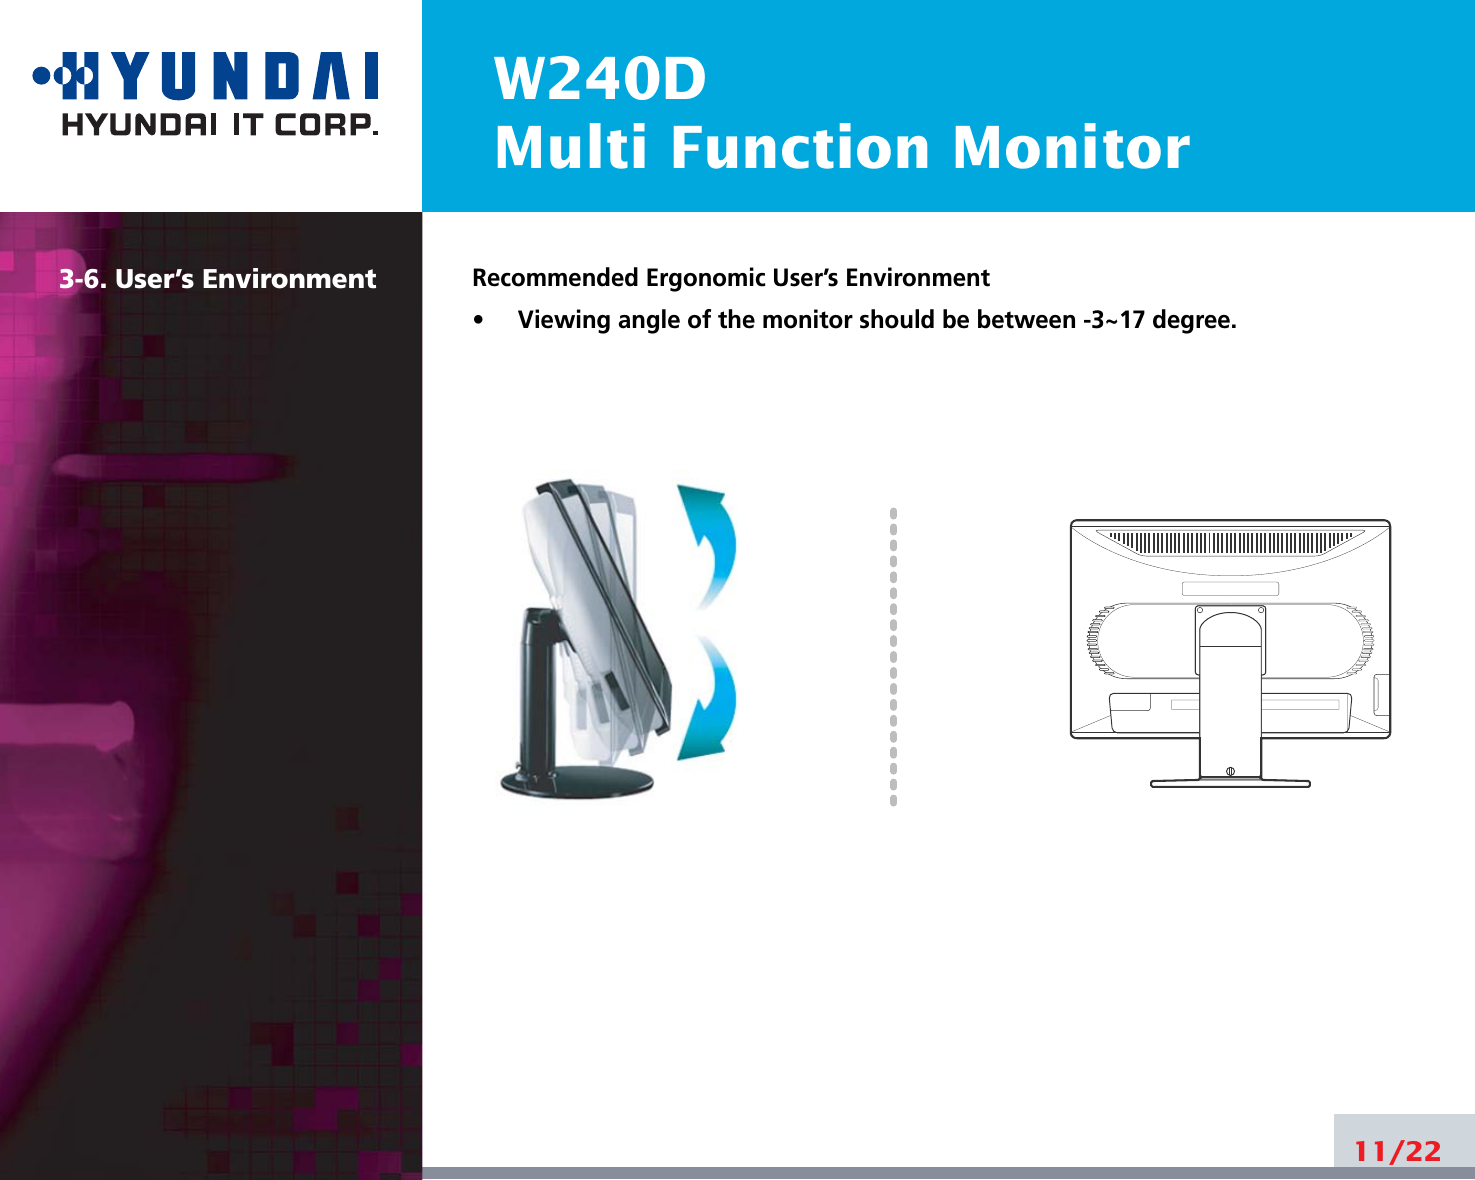 W240DMulti Function Monitor11/223-6. User’s Environment Recommended Ergonomic User’s Environment•     Viewing angle of the monitor should be between -3~17 degree.